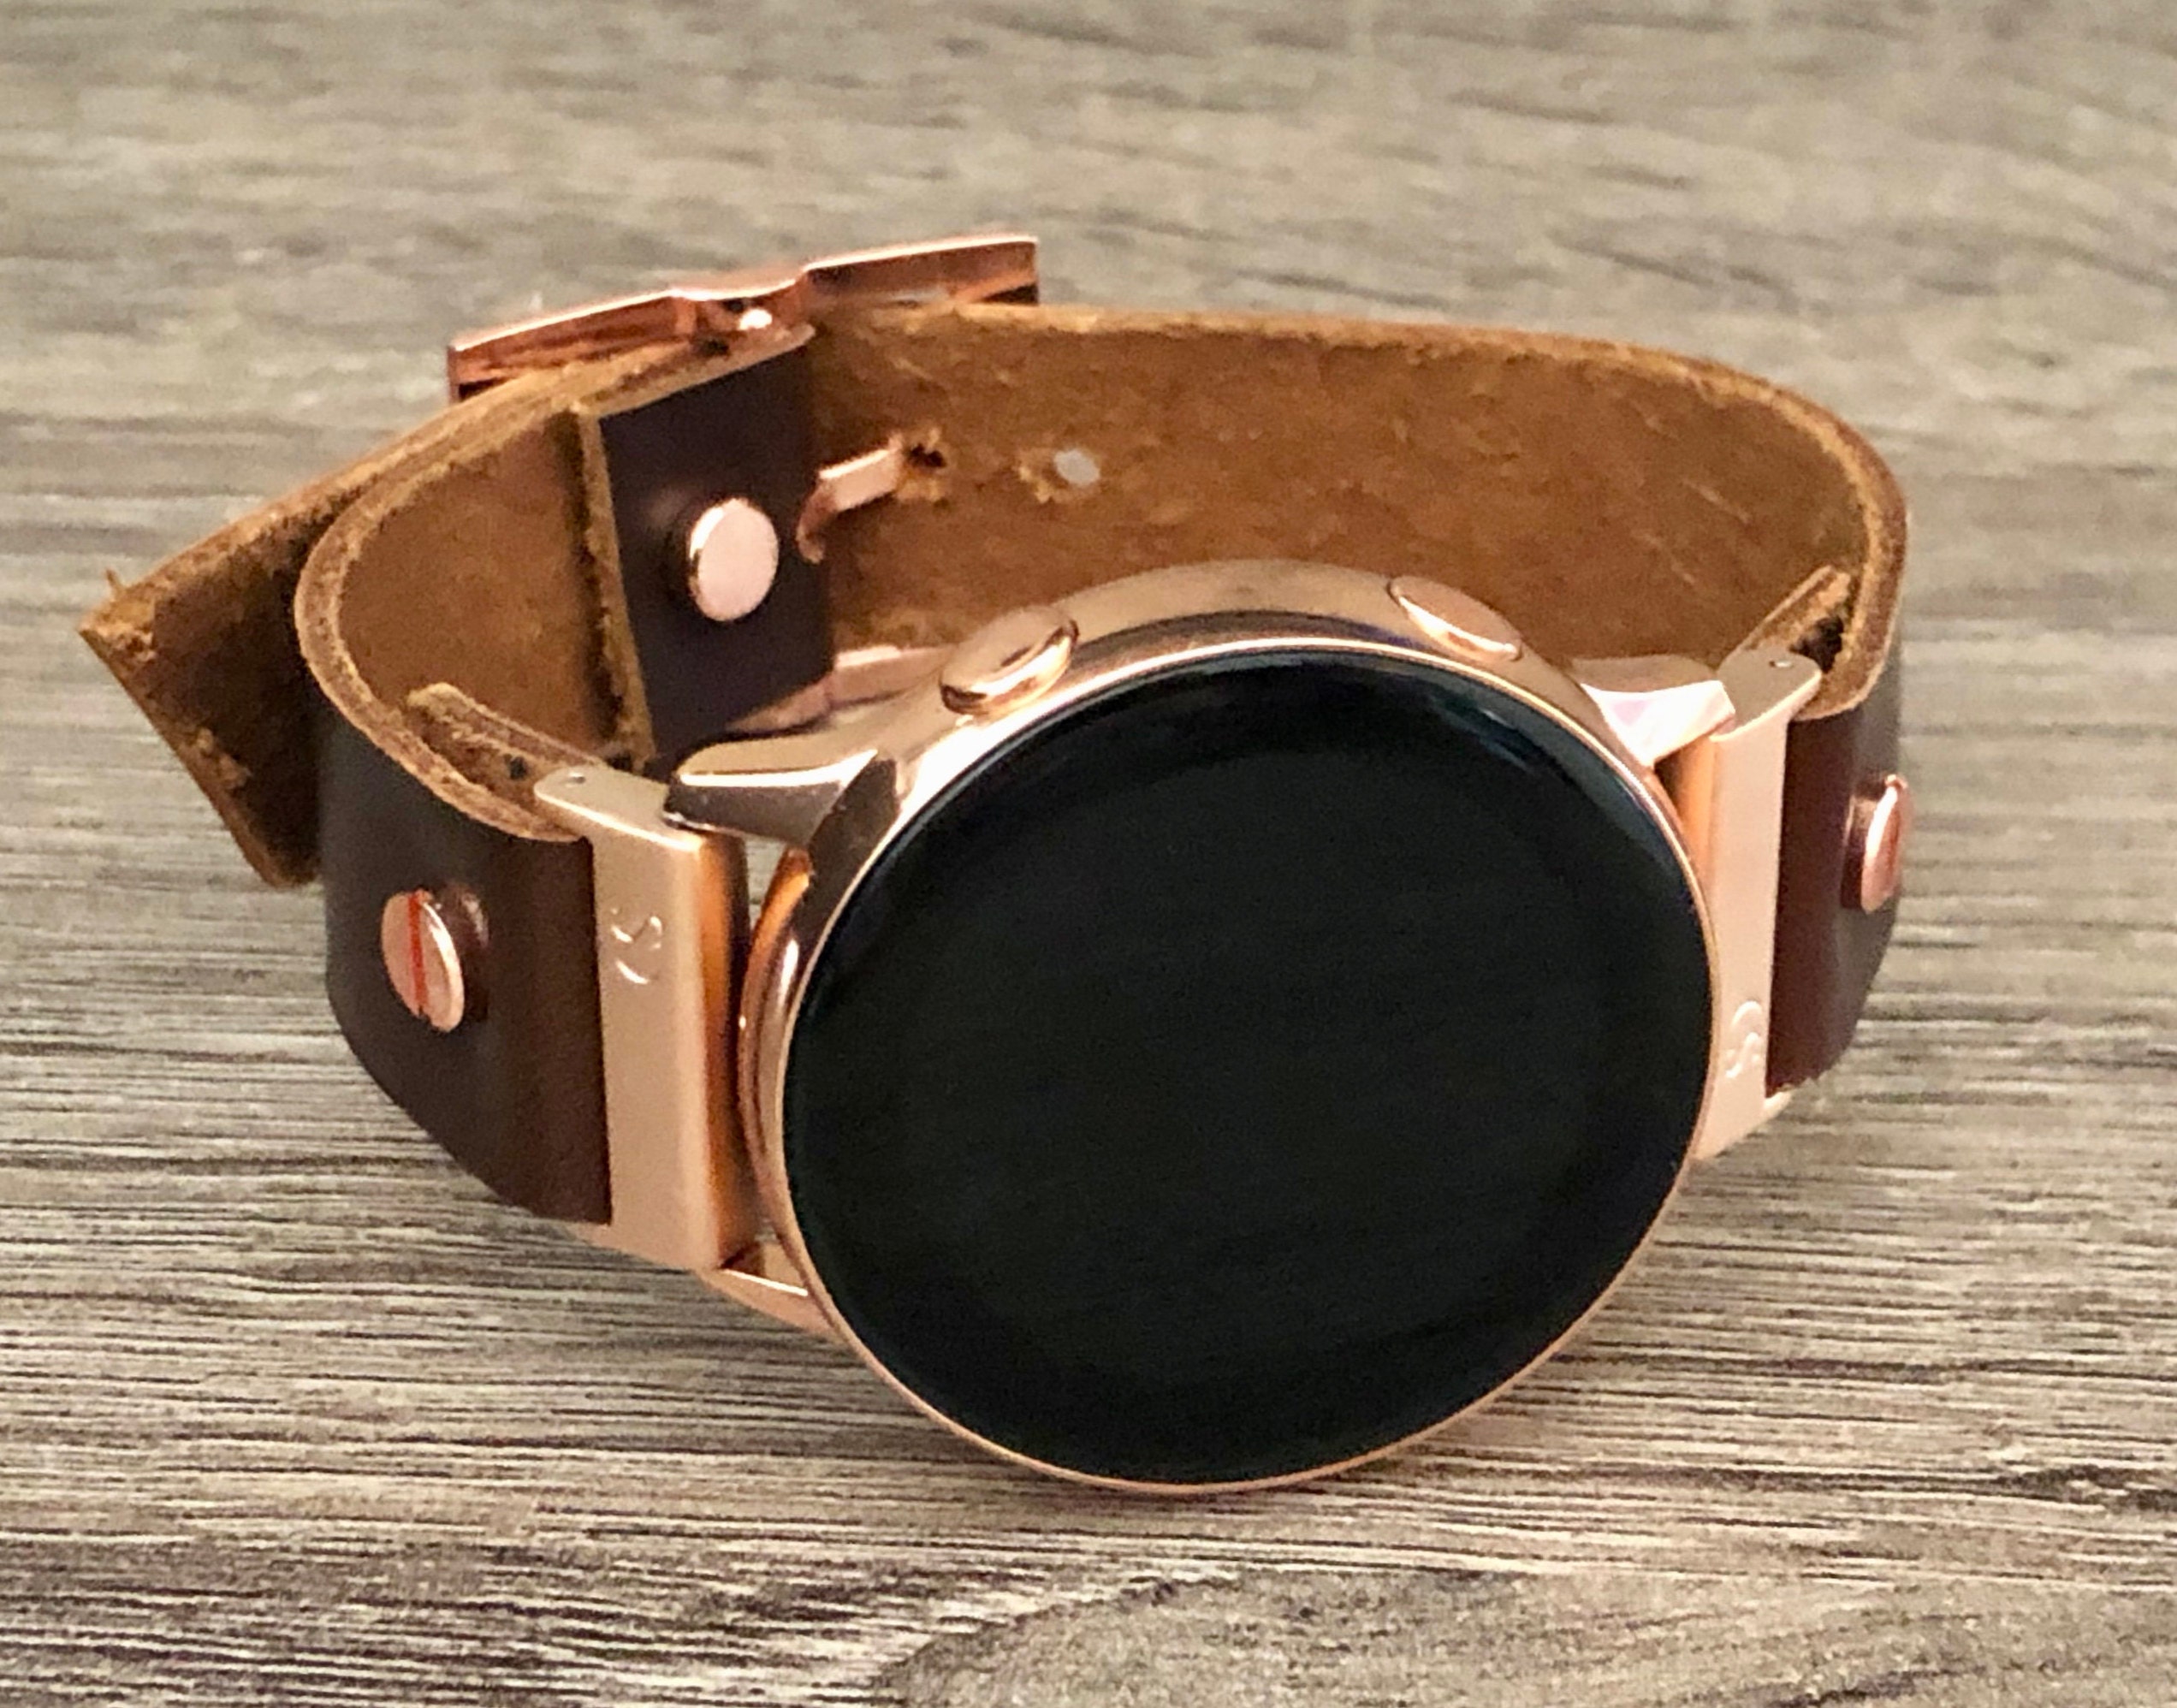 galaxy watch rose gold for men